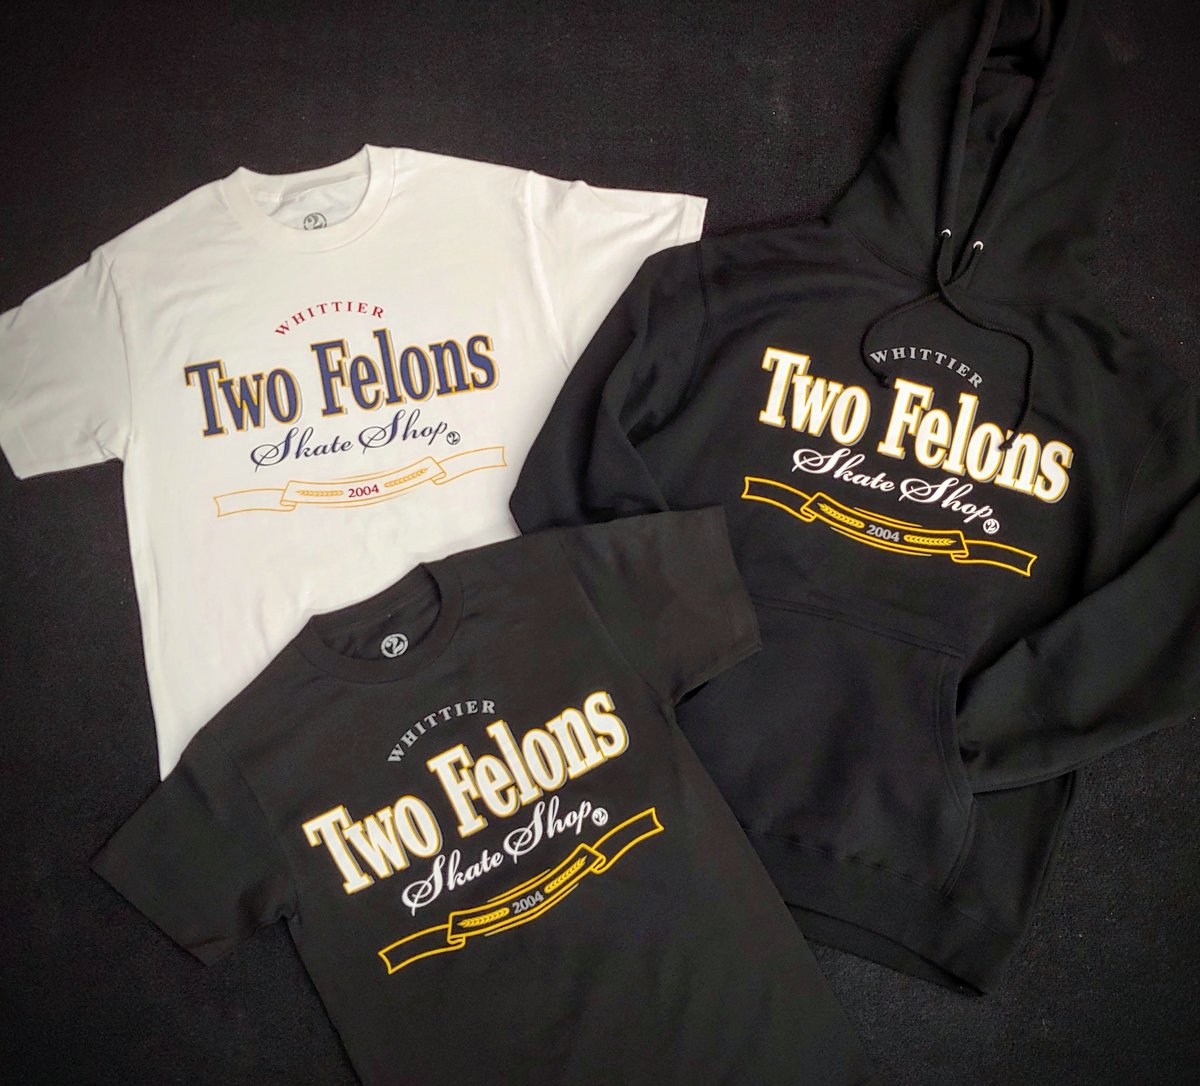 Two Felons "MT White" T